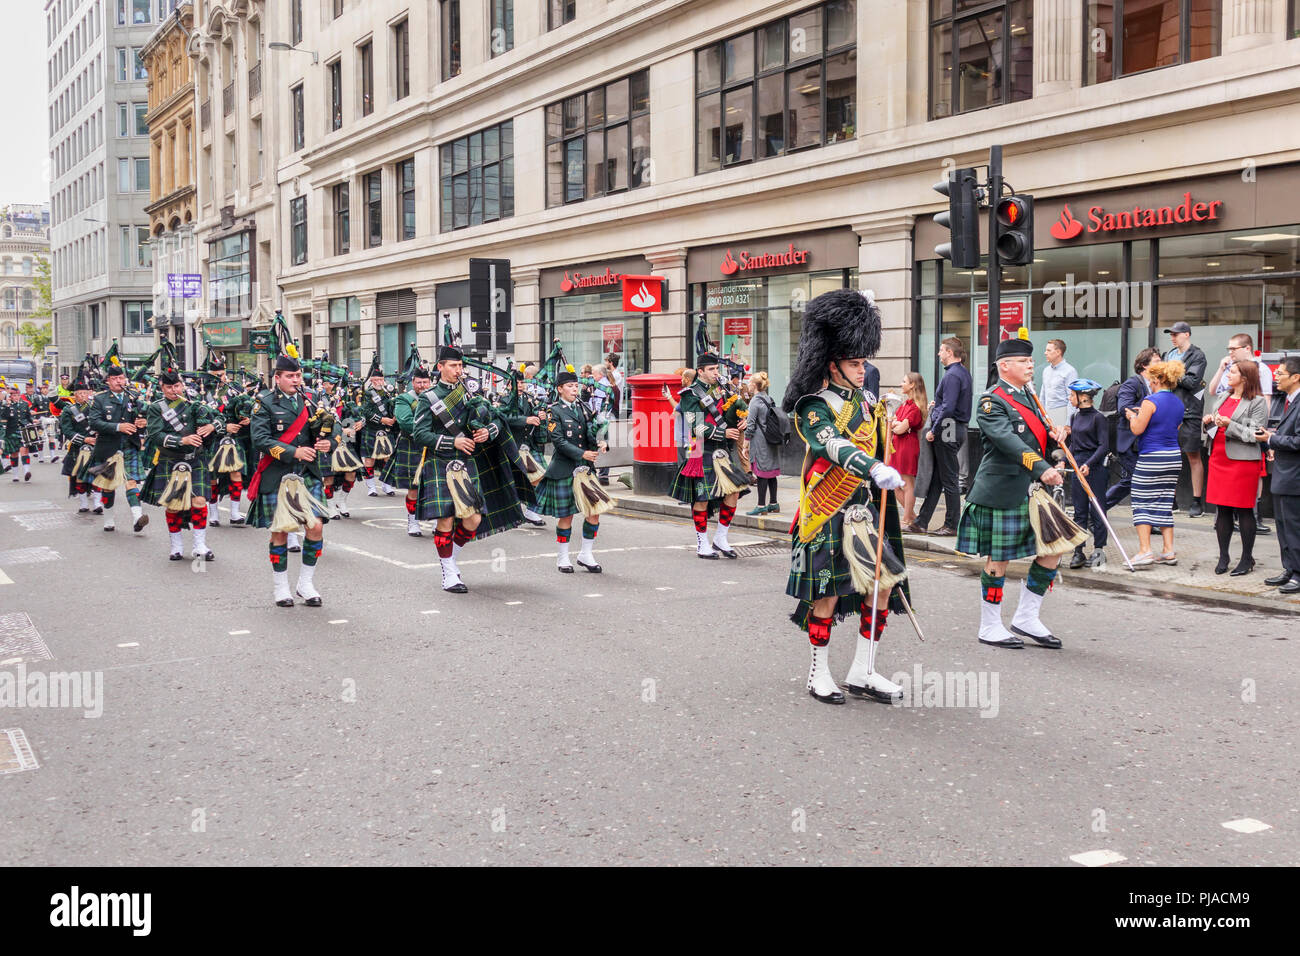 City of London, London EC4, UK, 05th September 2018. The Royal Regiment of Fusiliers celebrates 50 years. The regiment exercises its rights as a Privileged Regiment to march through the streets of the City of London, from the Tower of London to the Guildhall, here passing along Queen Street in the City of London EC4. Over 500 serving and retired personnel take part in the parade with veterans and affiliated overseas regiments including those here from the Royal Victoria Regiment in Australia with kilted pipers and drummers playing bagpipes and drums. Credit: Graham Prentice/Alamy Live News. Stock Photo